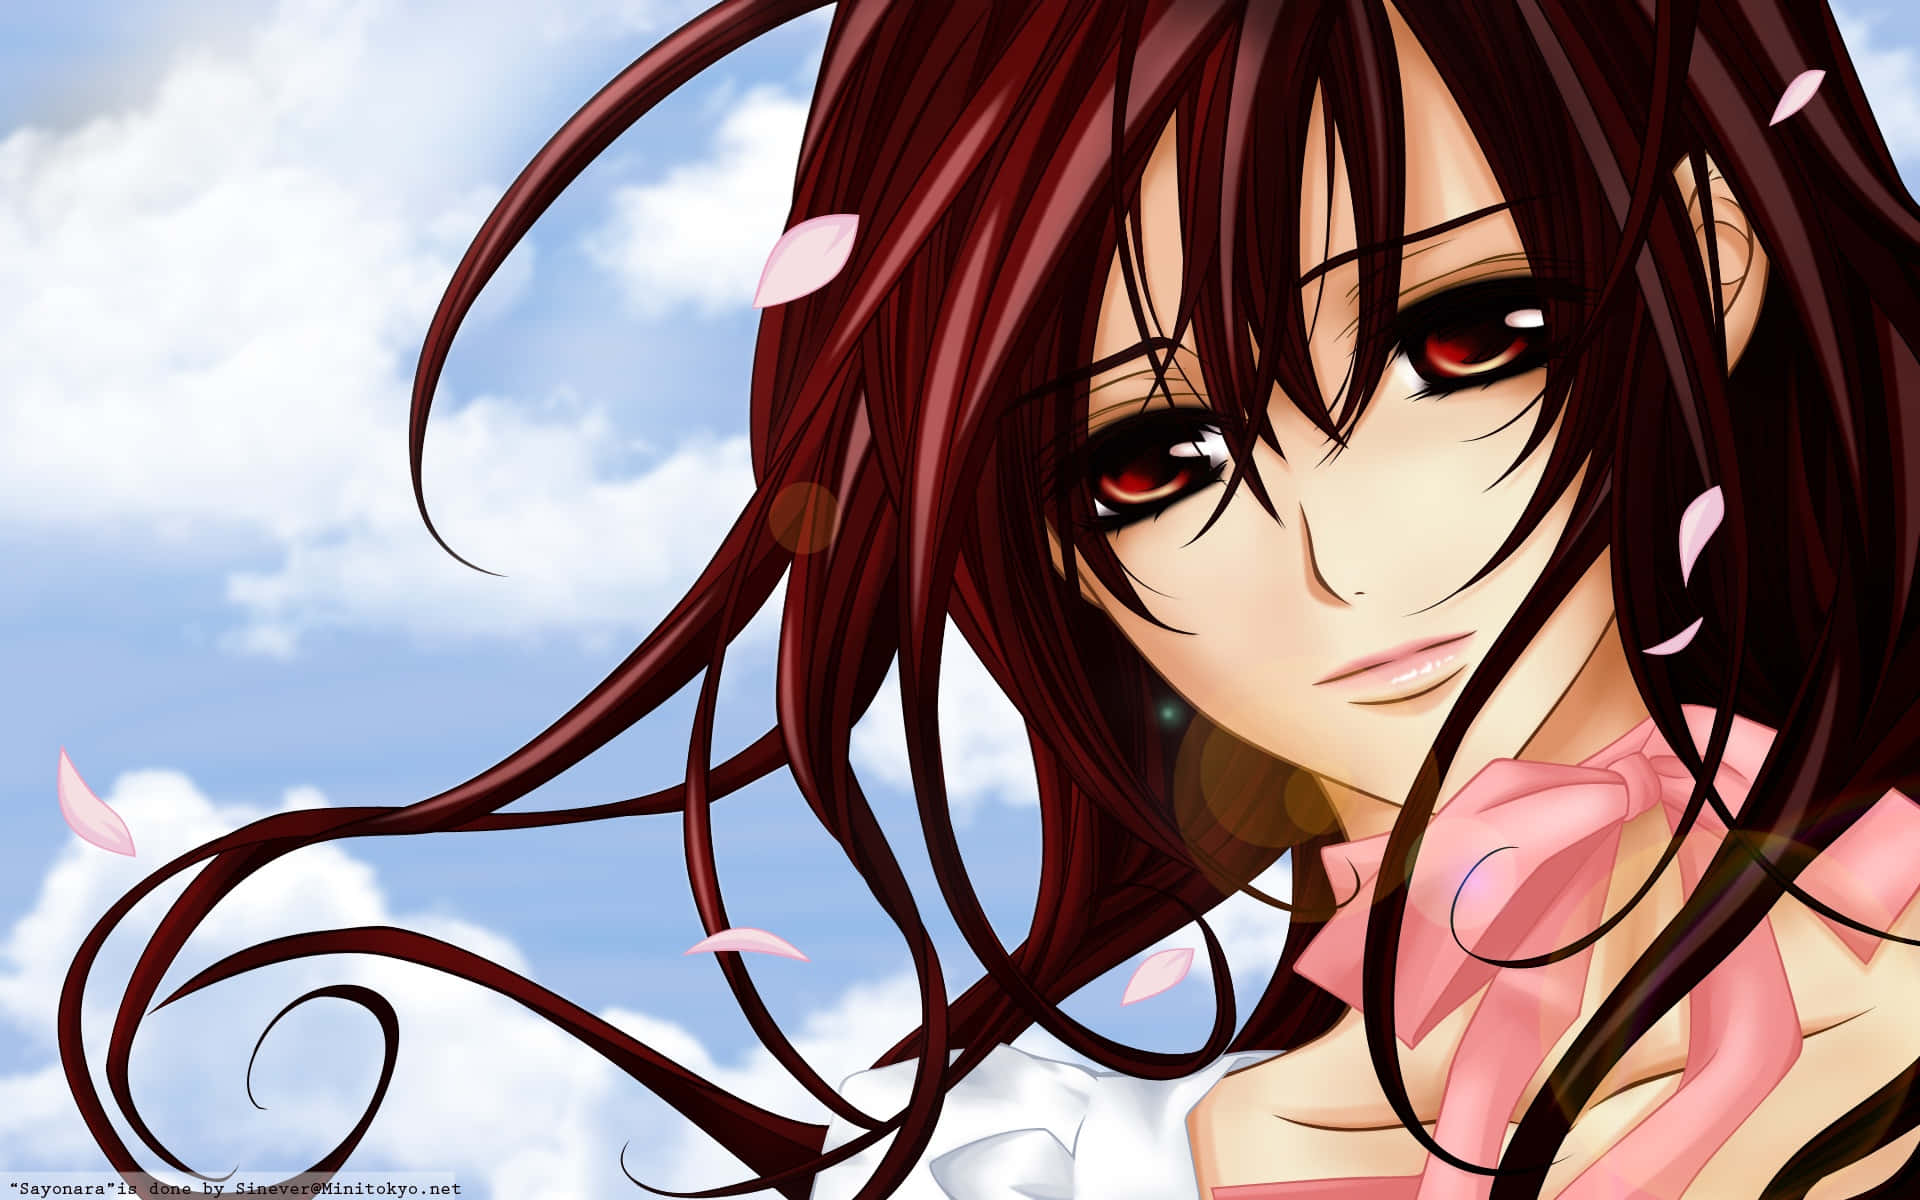 An anime character with a melancholic expression Wallpaper